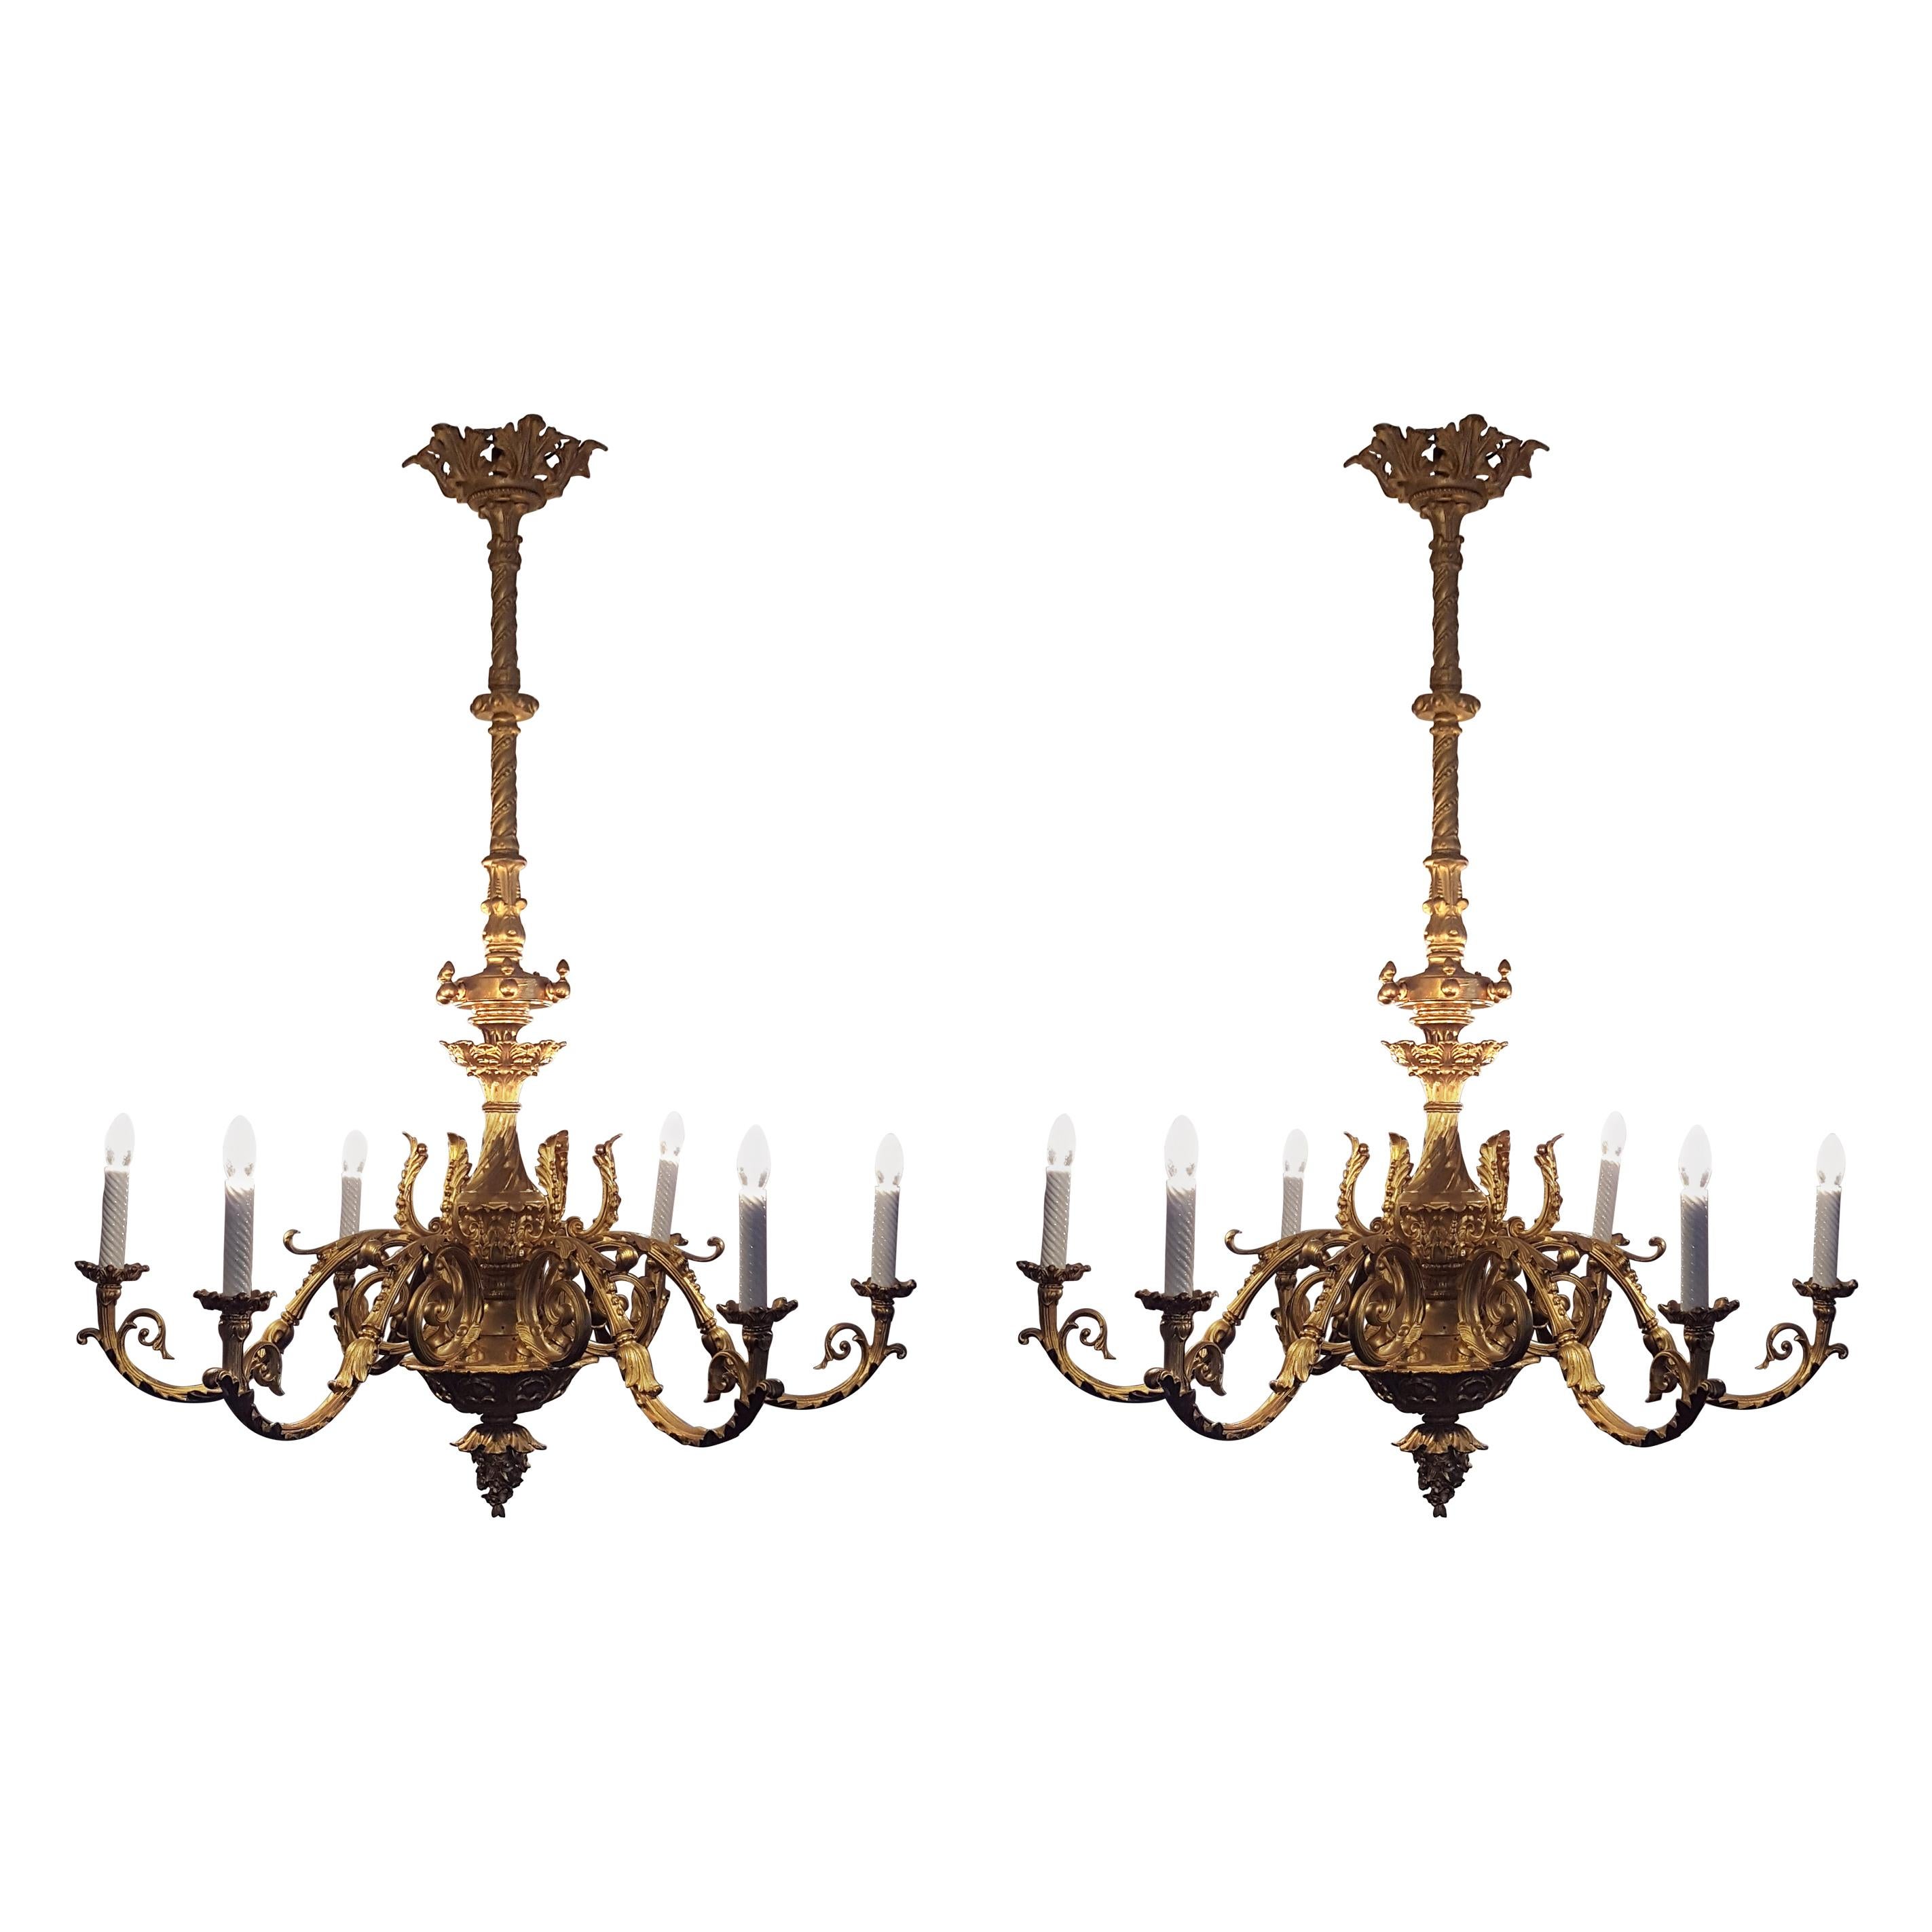 Pair of Rococo Baroque Iron Cast French Chandeliers, Gold Bronzed 6 Flames